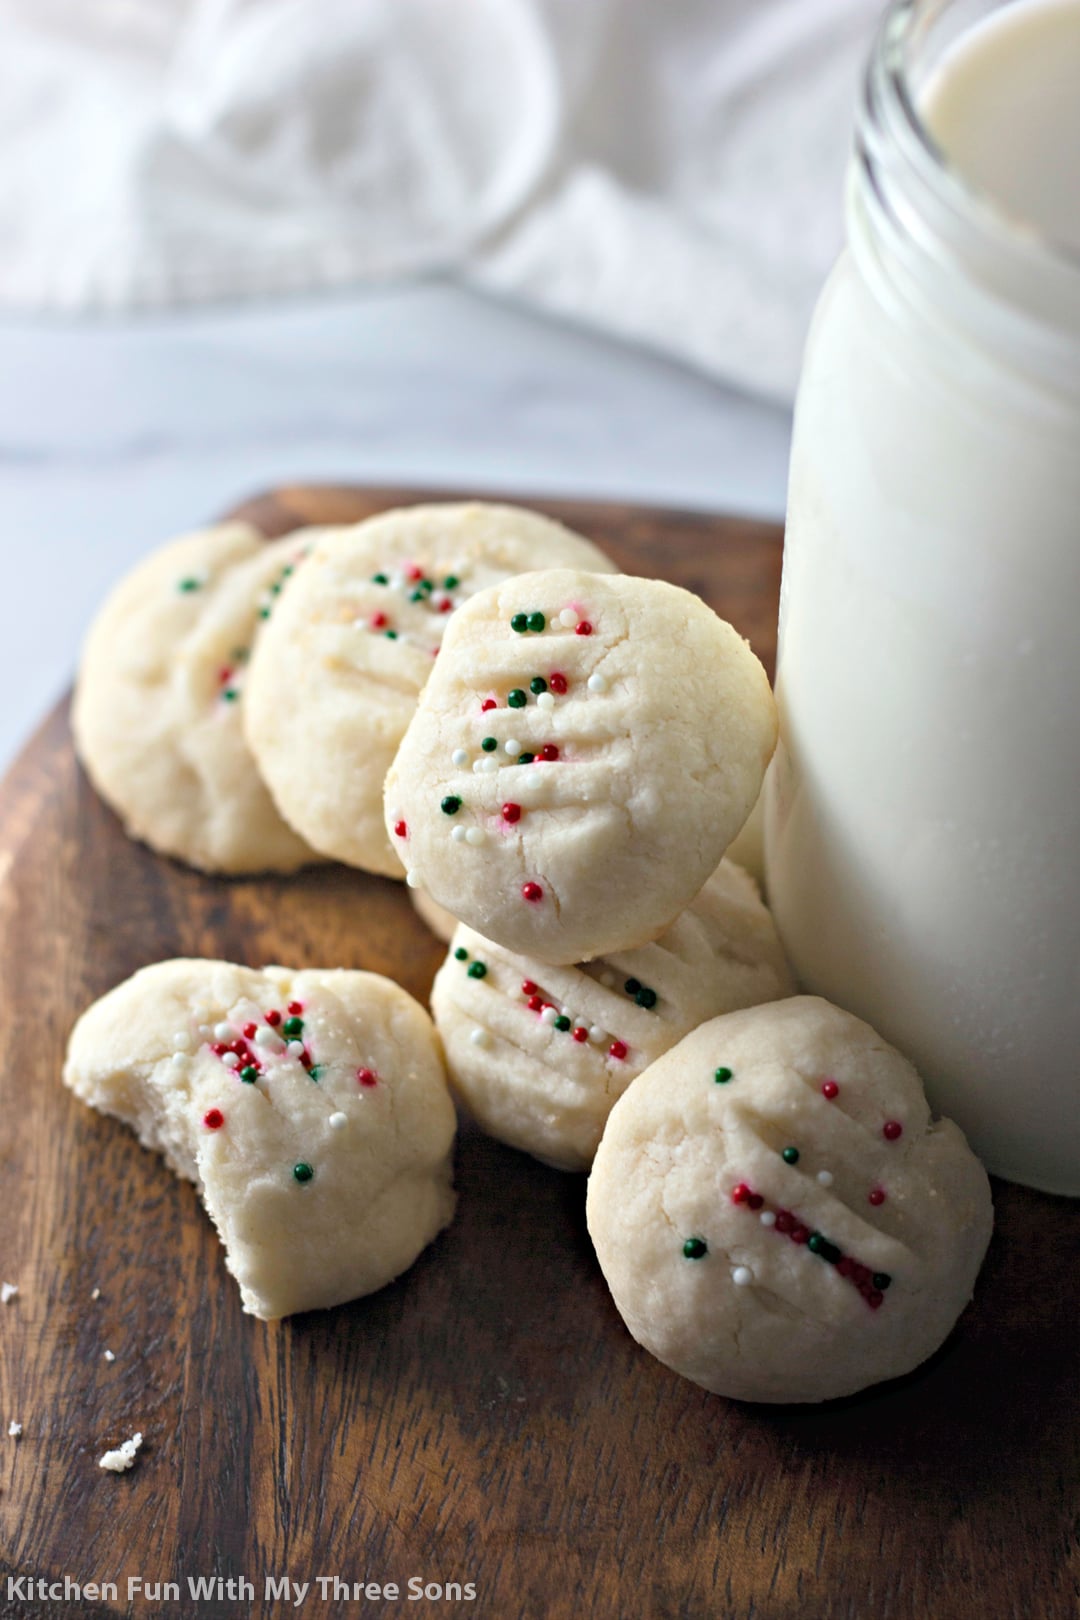 https://kitchenfunwithmy3sons.com/wp-content/uploads/2020/12/Whipped-Shortbread-Cookies-21.jpg